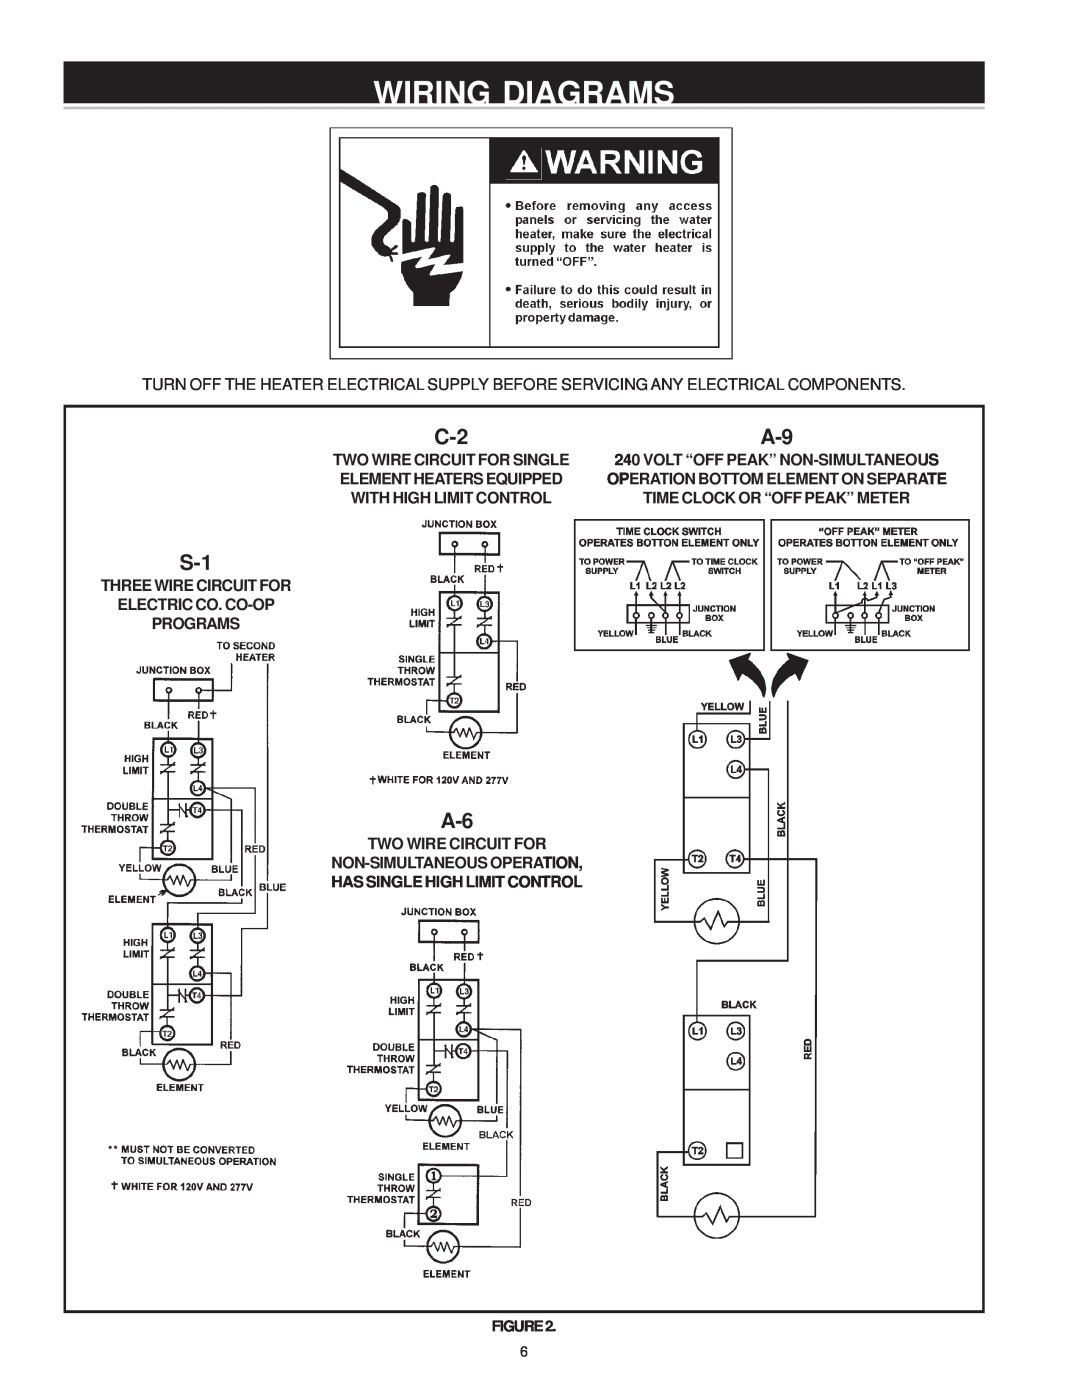 A.O. Smith WATER HEATERS instruction manual Wiring Diagrams 